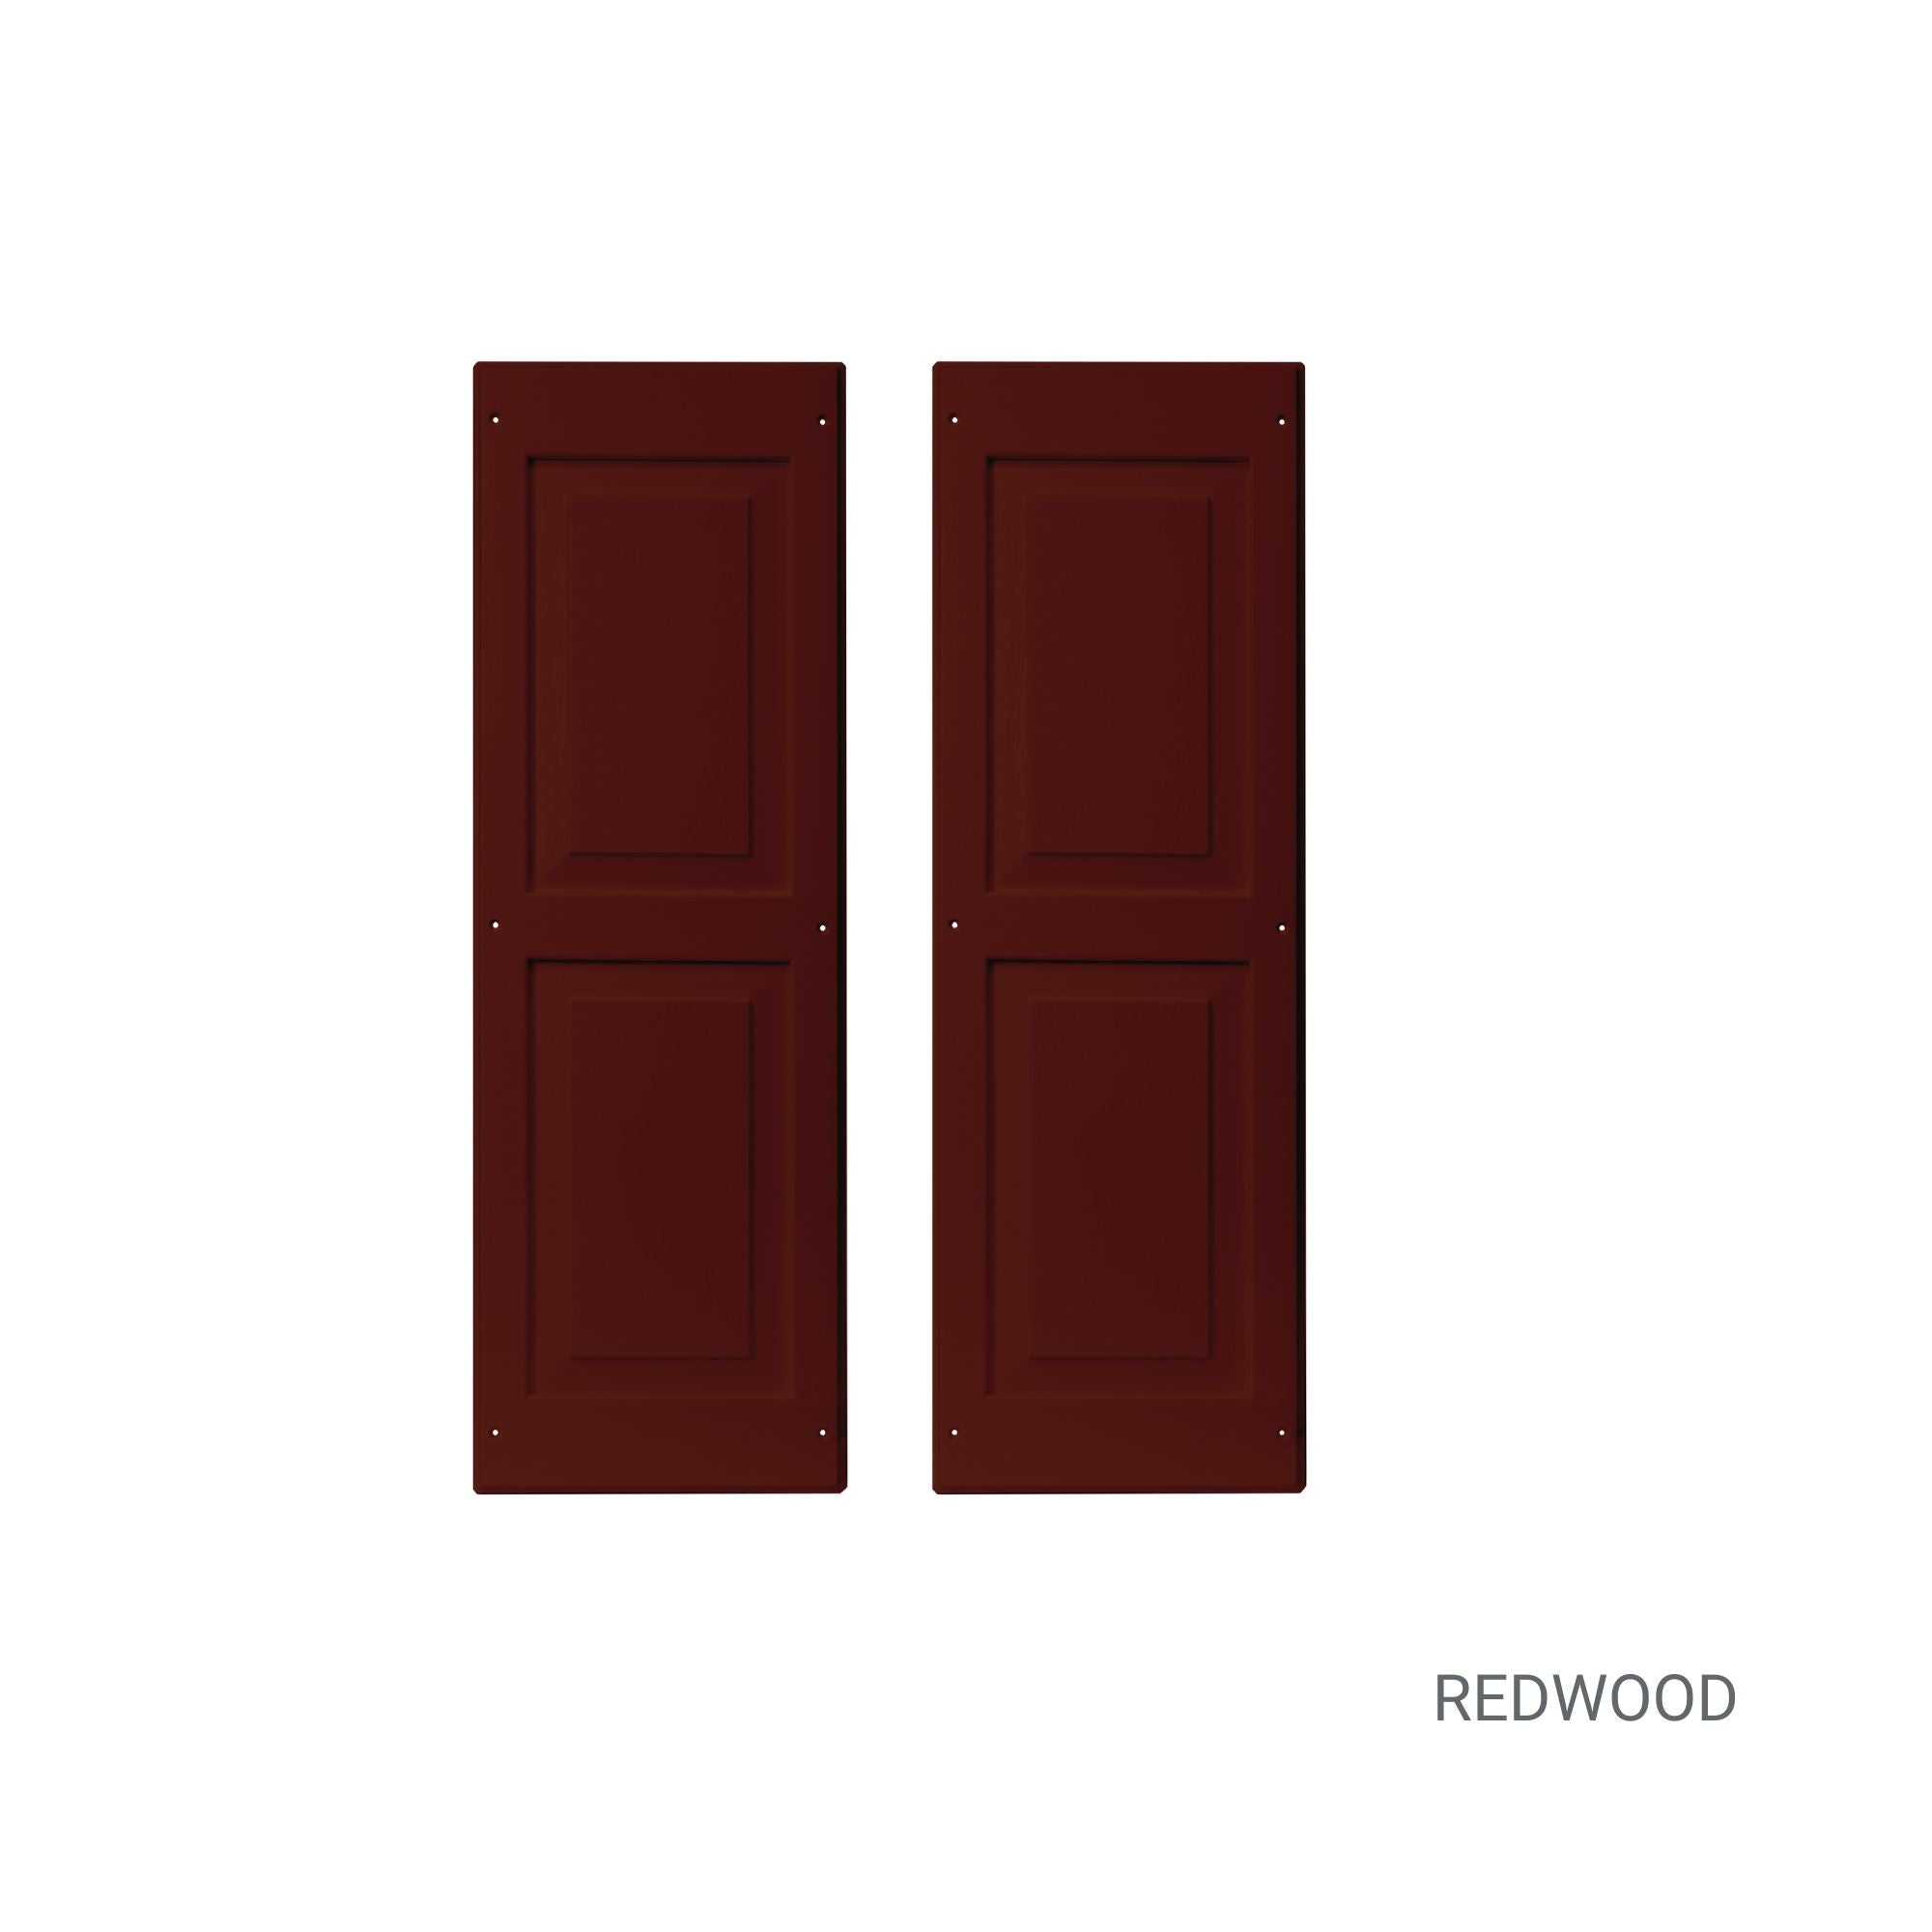 Pair of 12" W x 36" H Raised Panel Shutters in Redwood for Sheds, Playhouses, and MORE